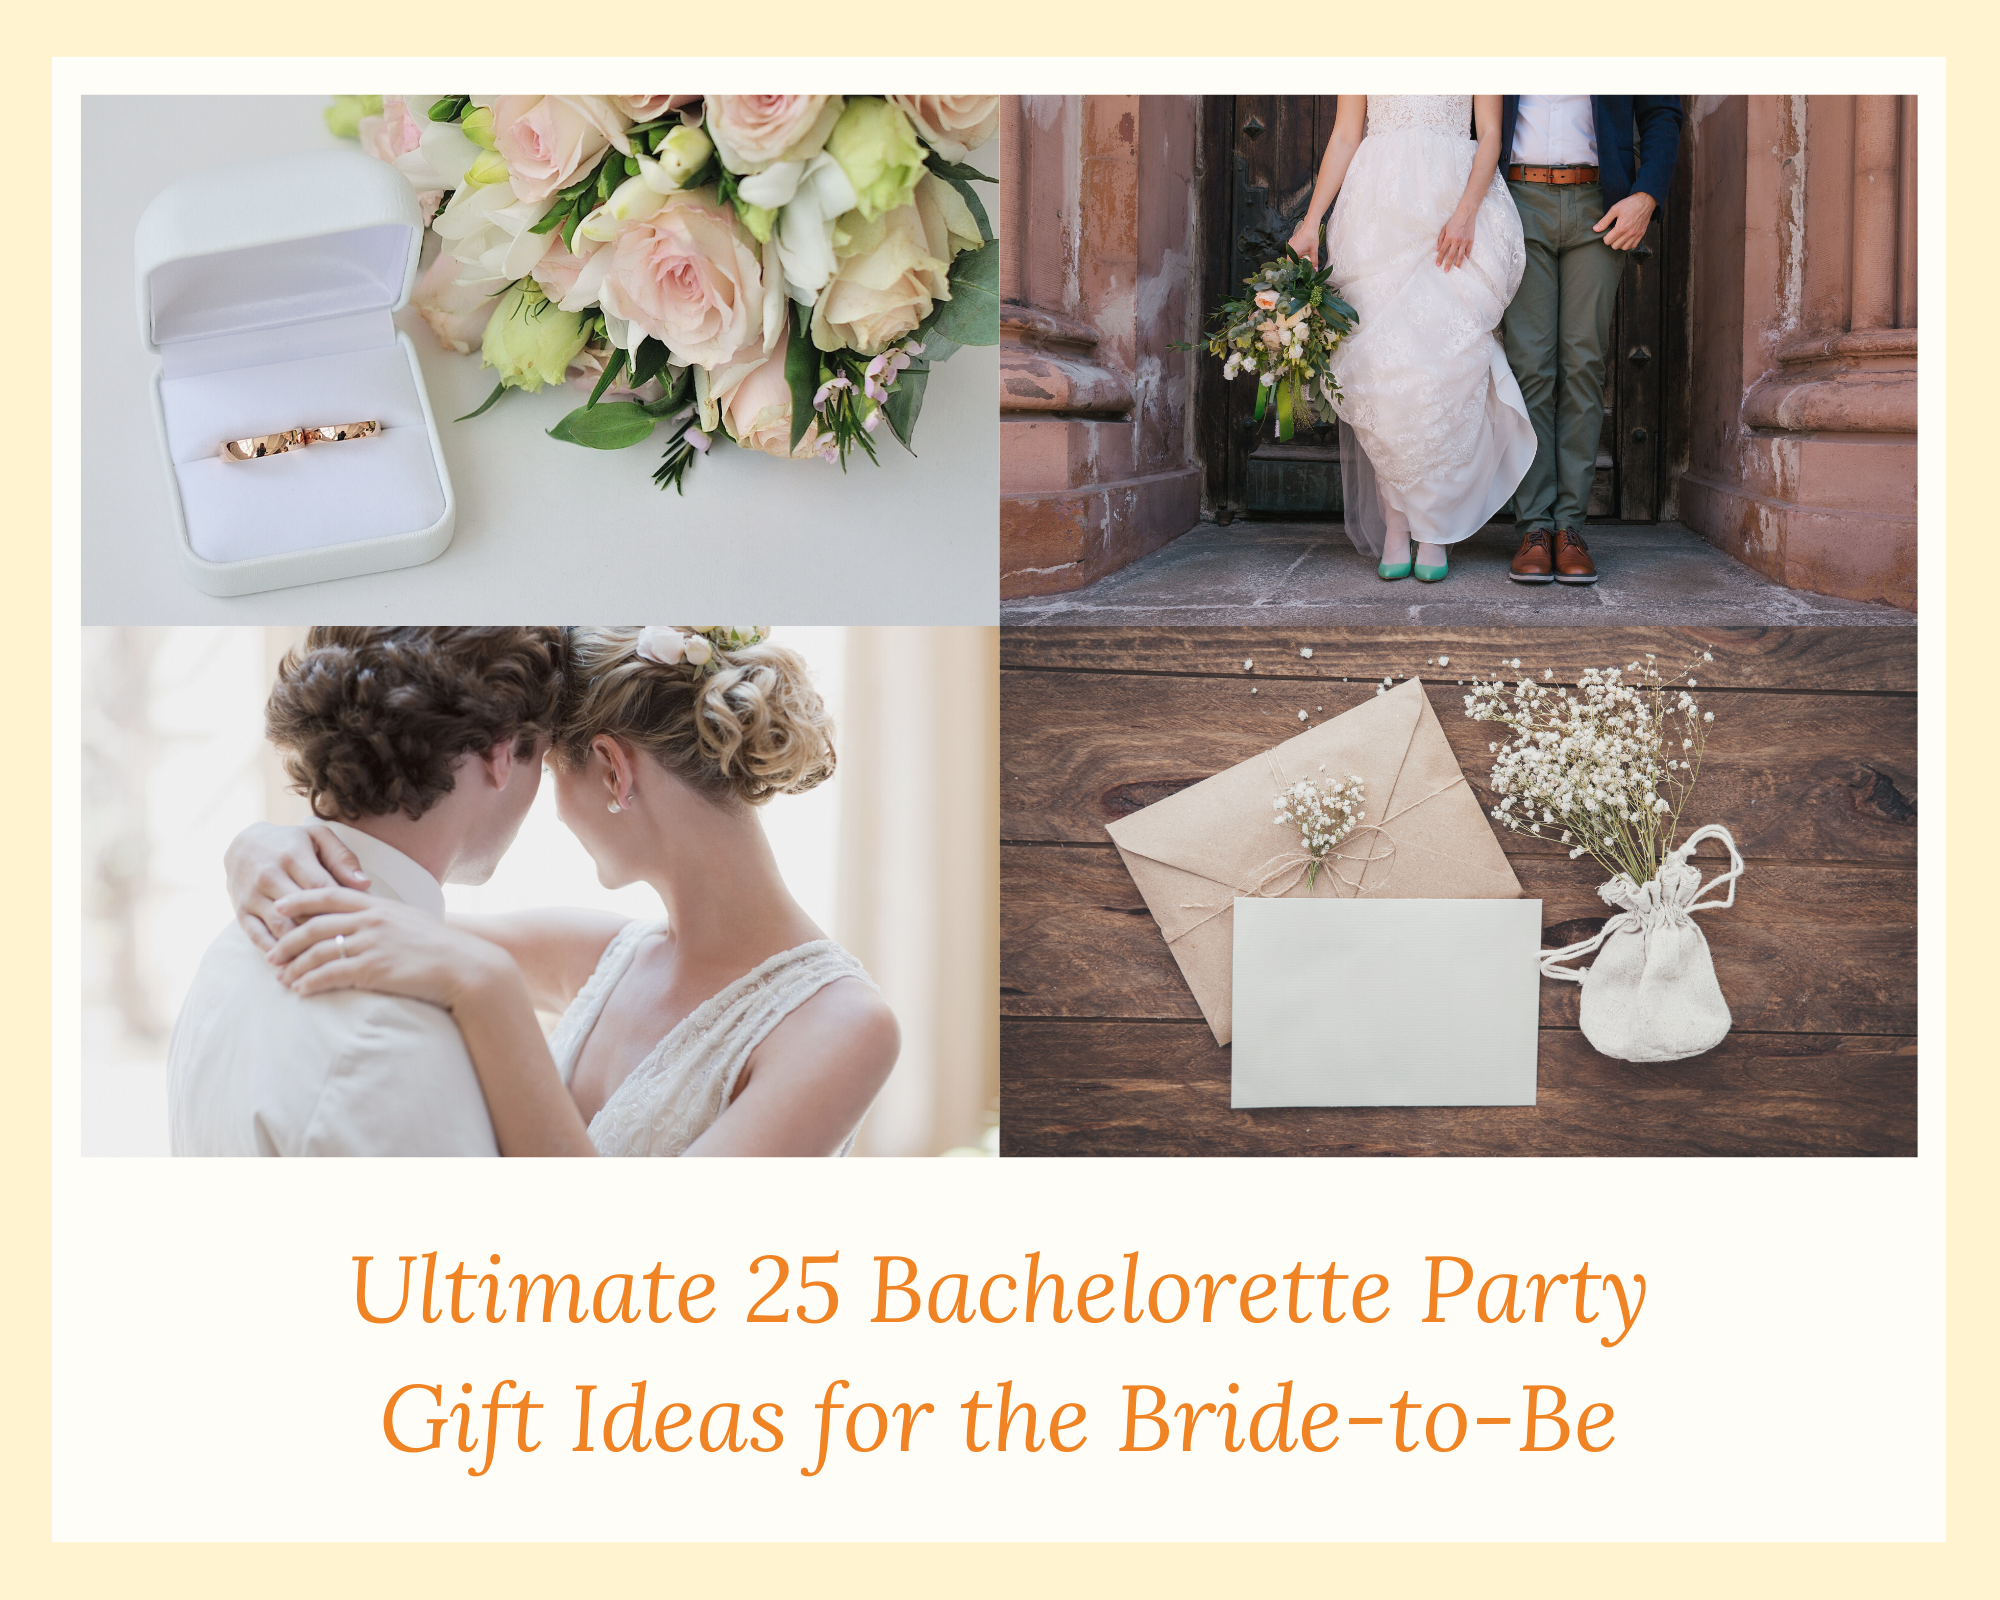 Bachelorette Party Favors and Supplies | Beau-coup